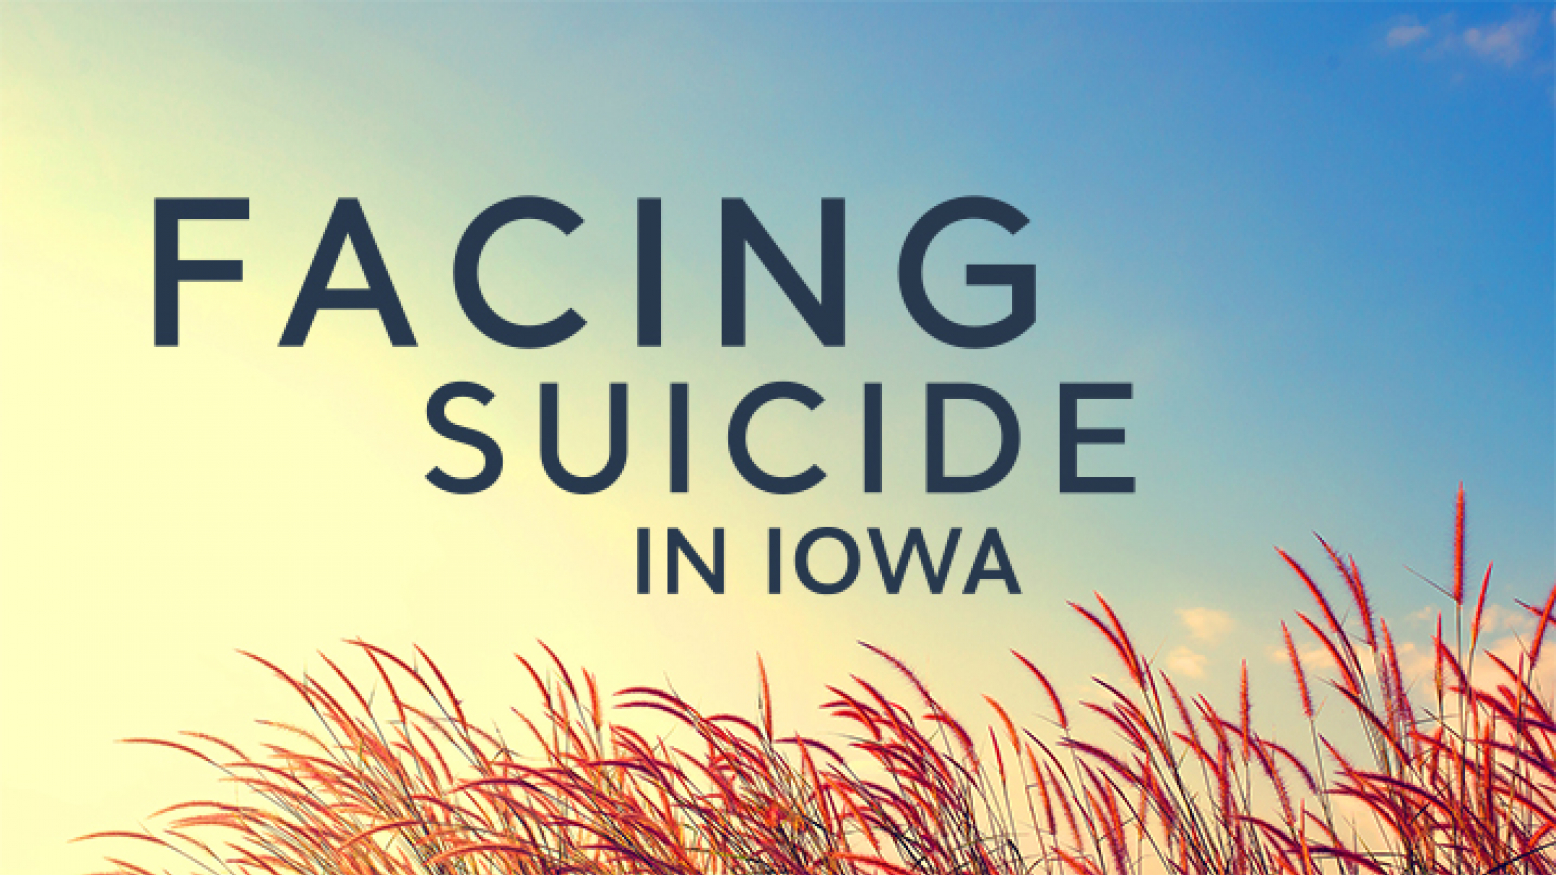 Facing Suicide in Iowa text on sky view with wheat blowing in the wind